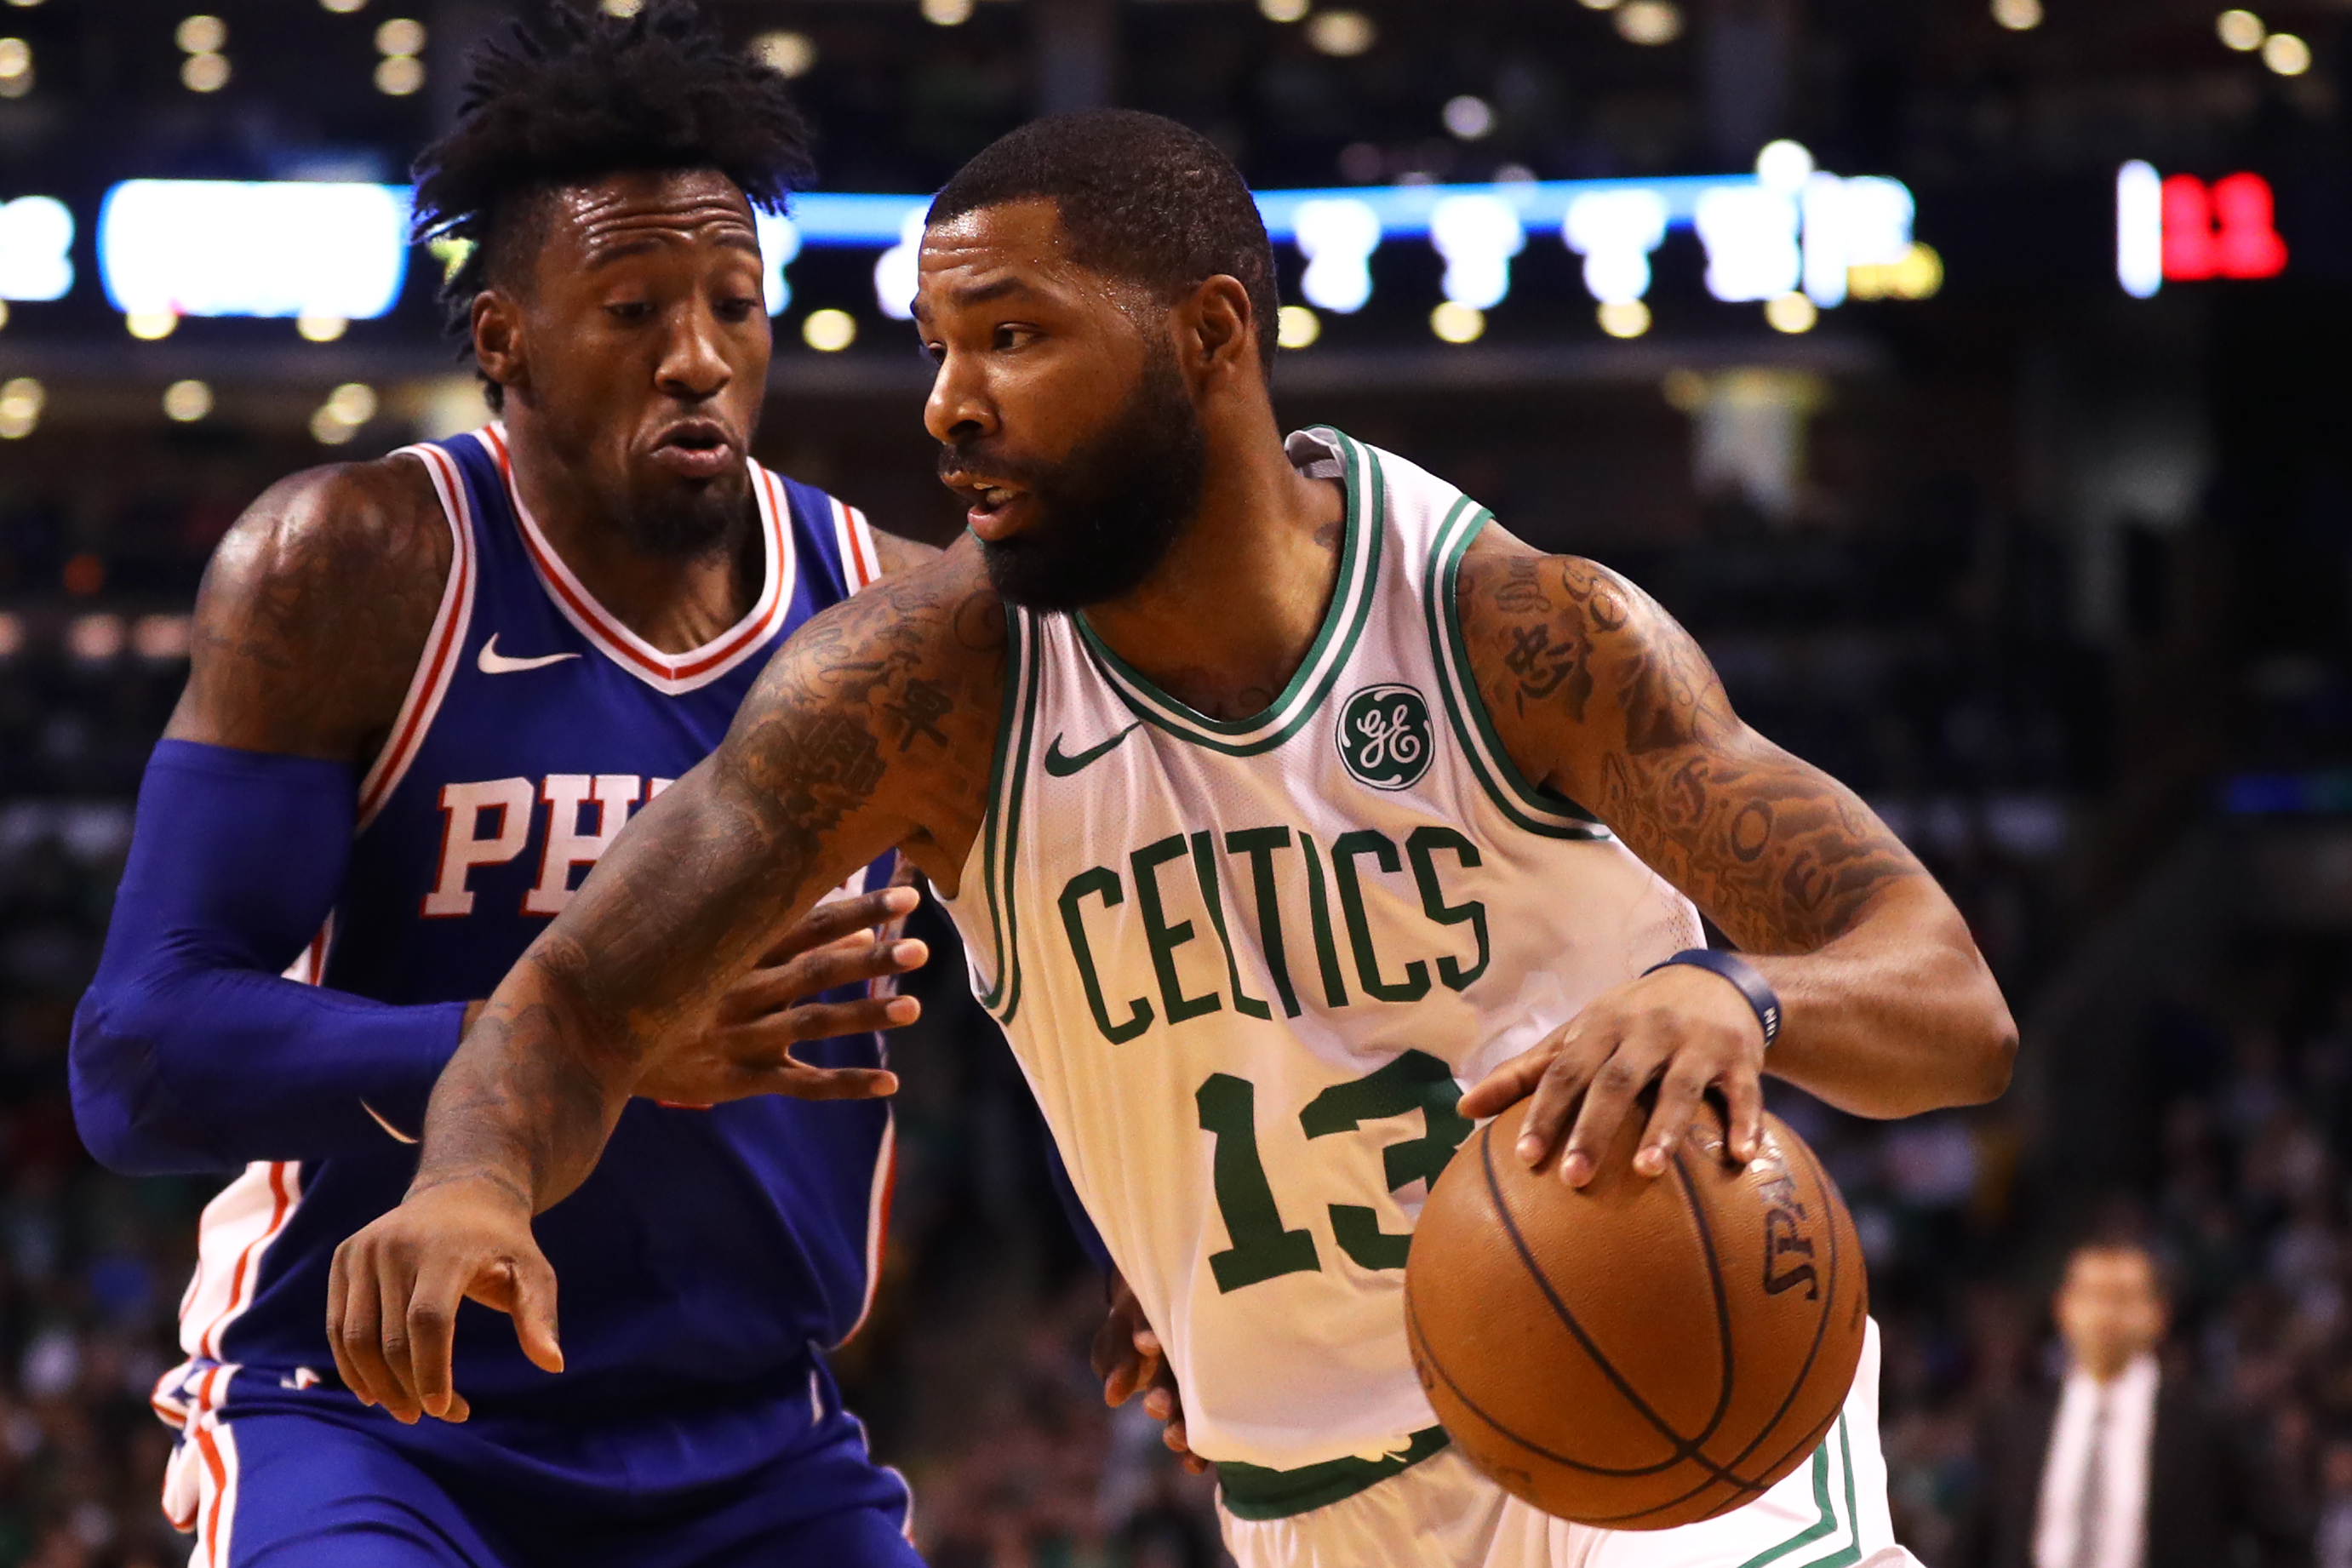 Boston Celtics' Marcus Morris gets into starting lineup, says he's